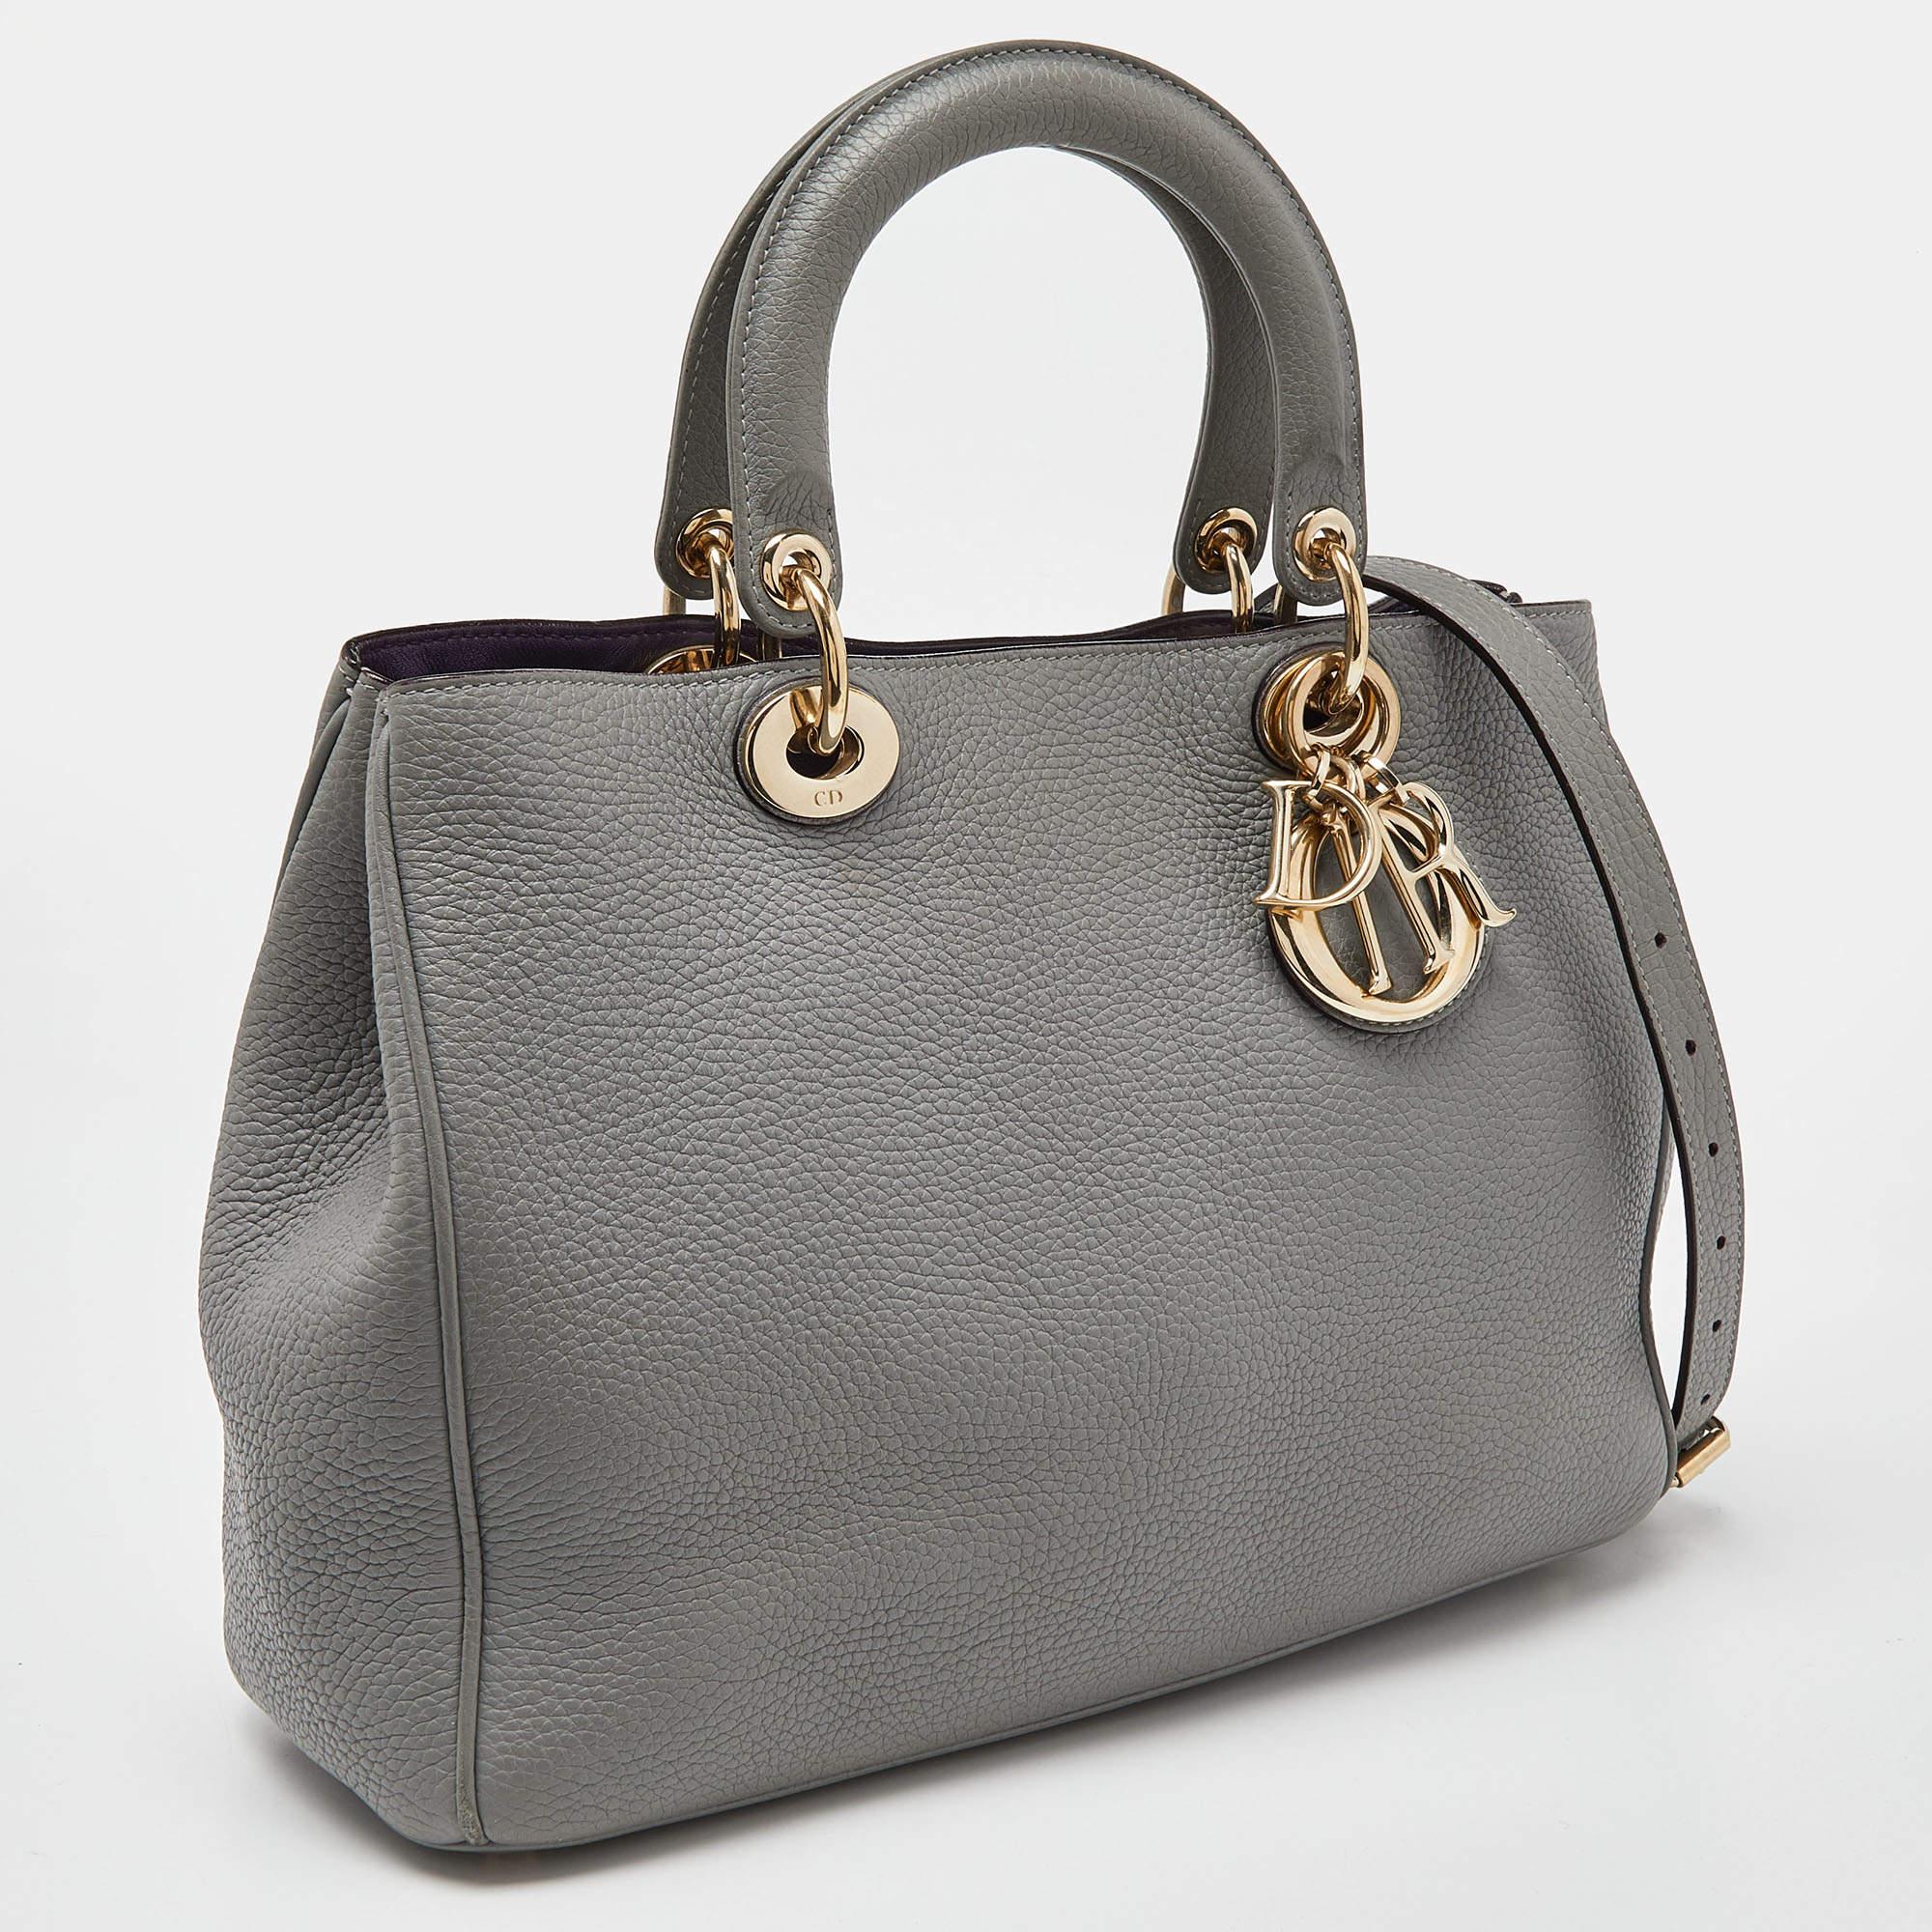 The Diorissimo perfectly captures the refined craftsmanship and the brand's vision of timeless elegance. The spacious interior makes this Dior tote a highly functional accessory. Created from leather, it is complemented with top dual handles, a